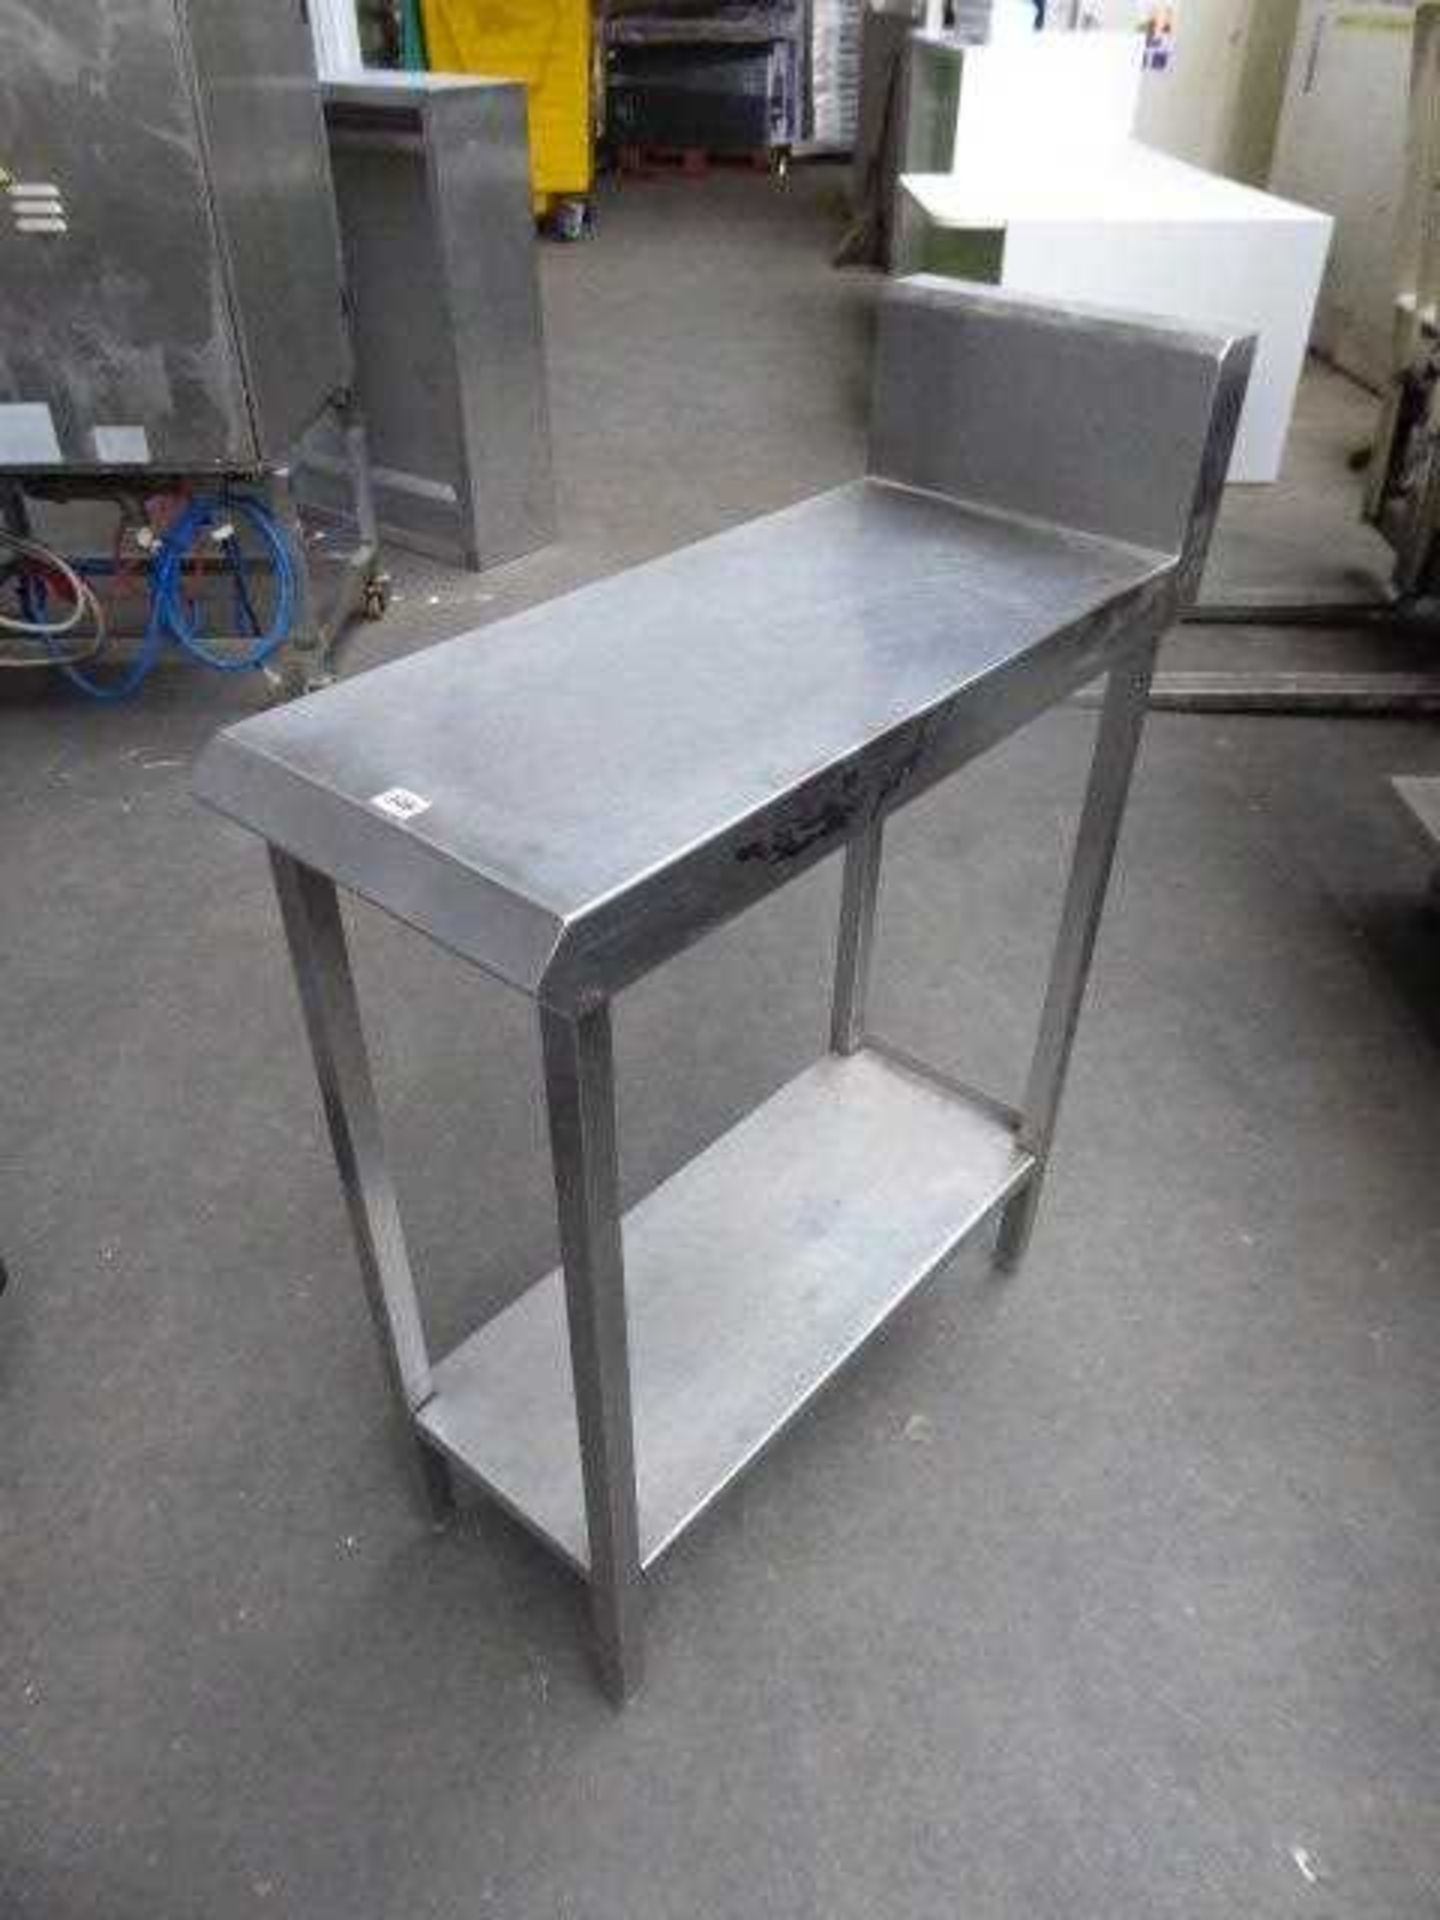 32cm Blue Seal infill table